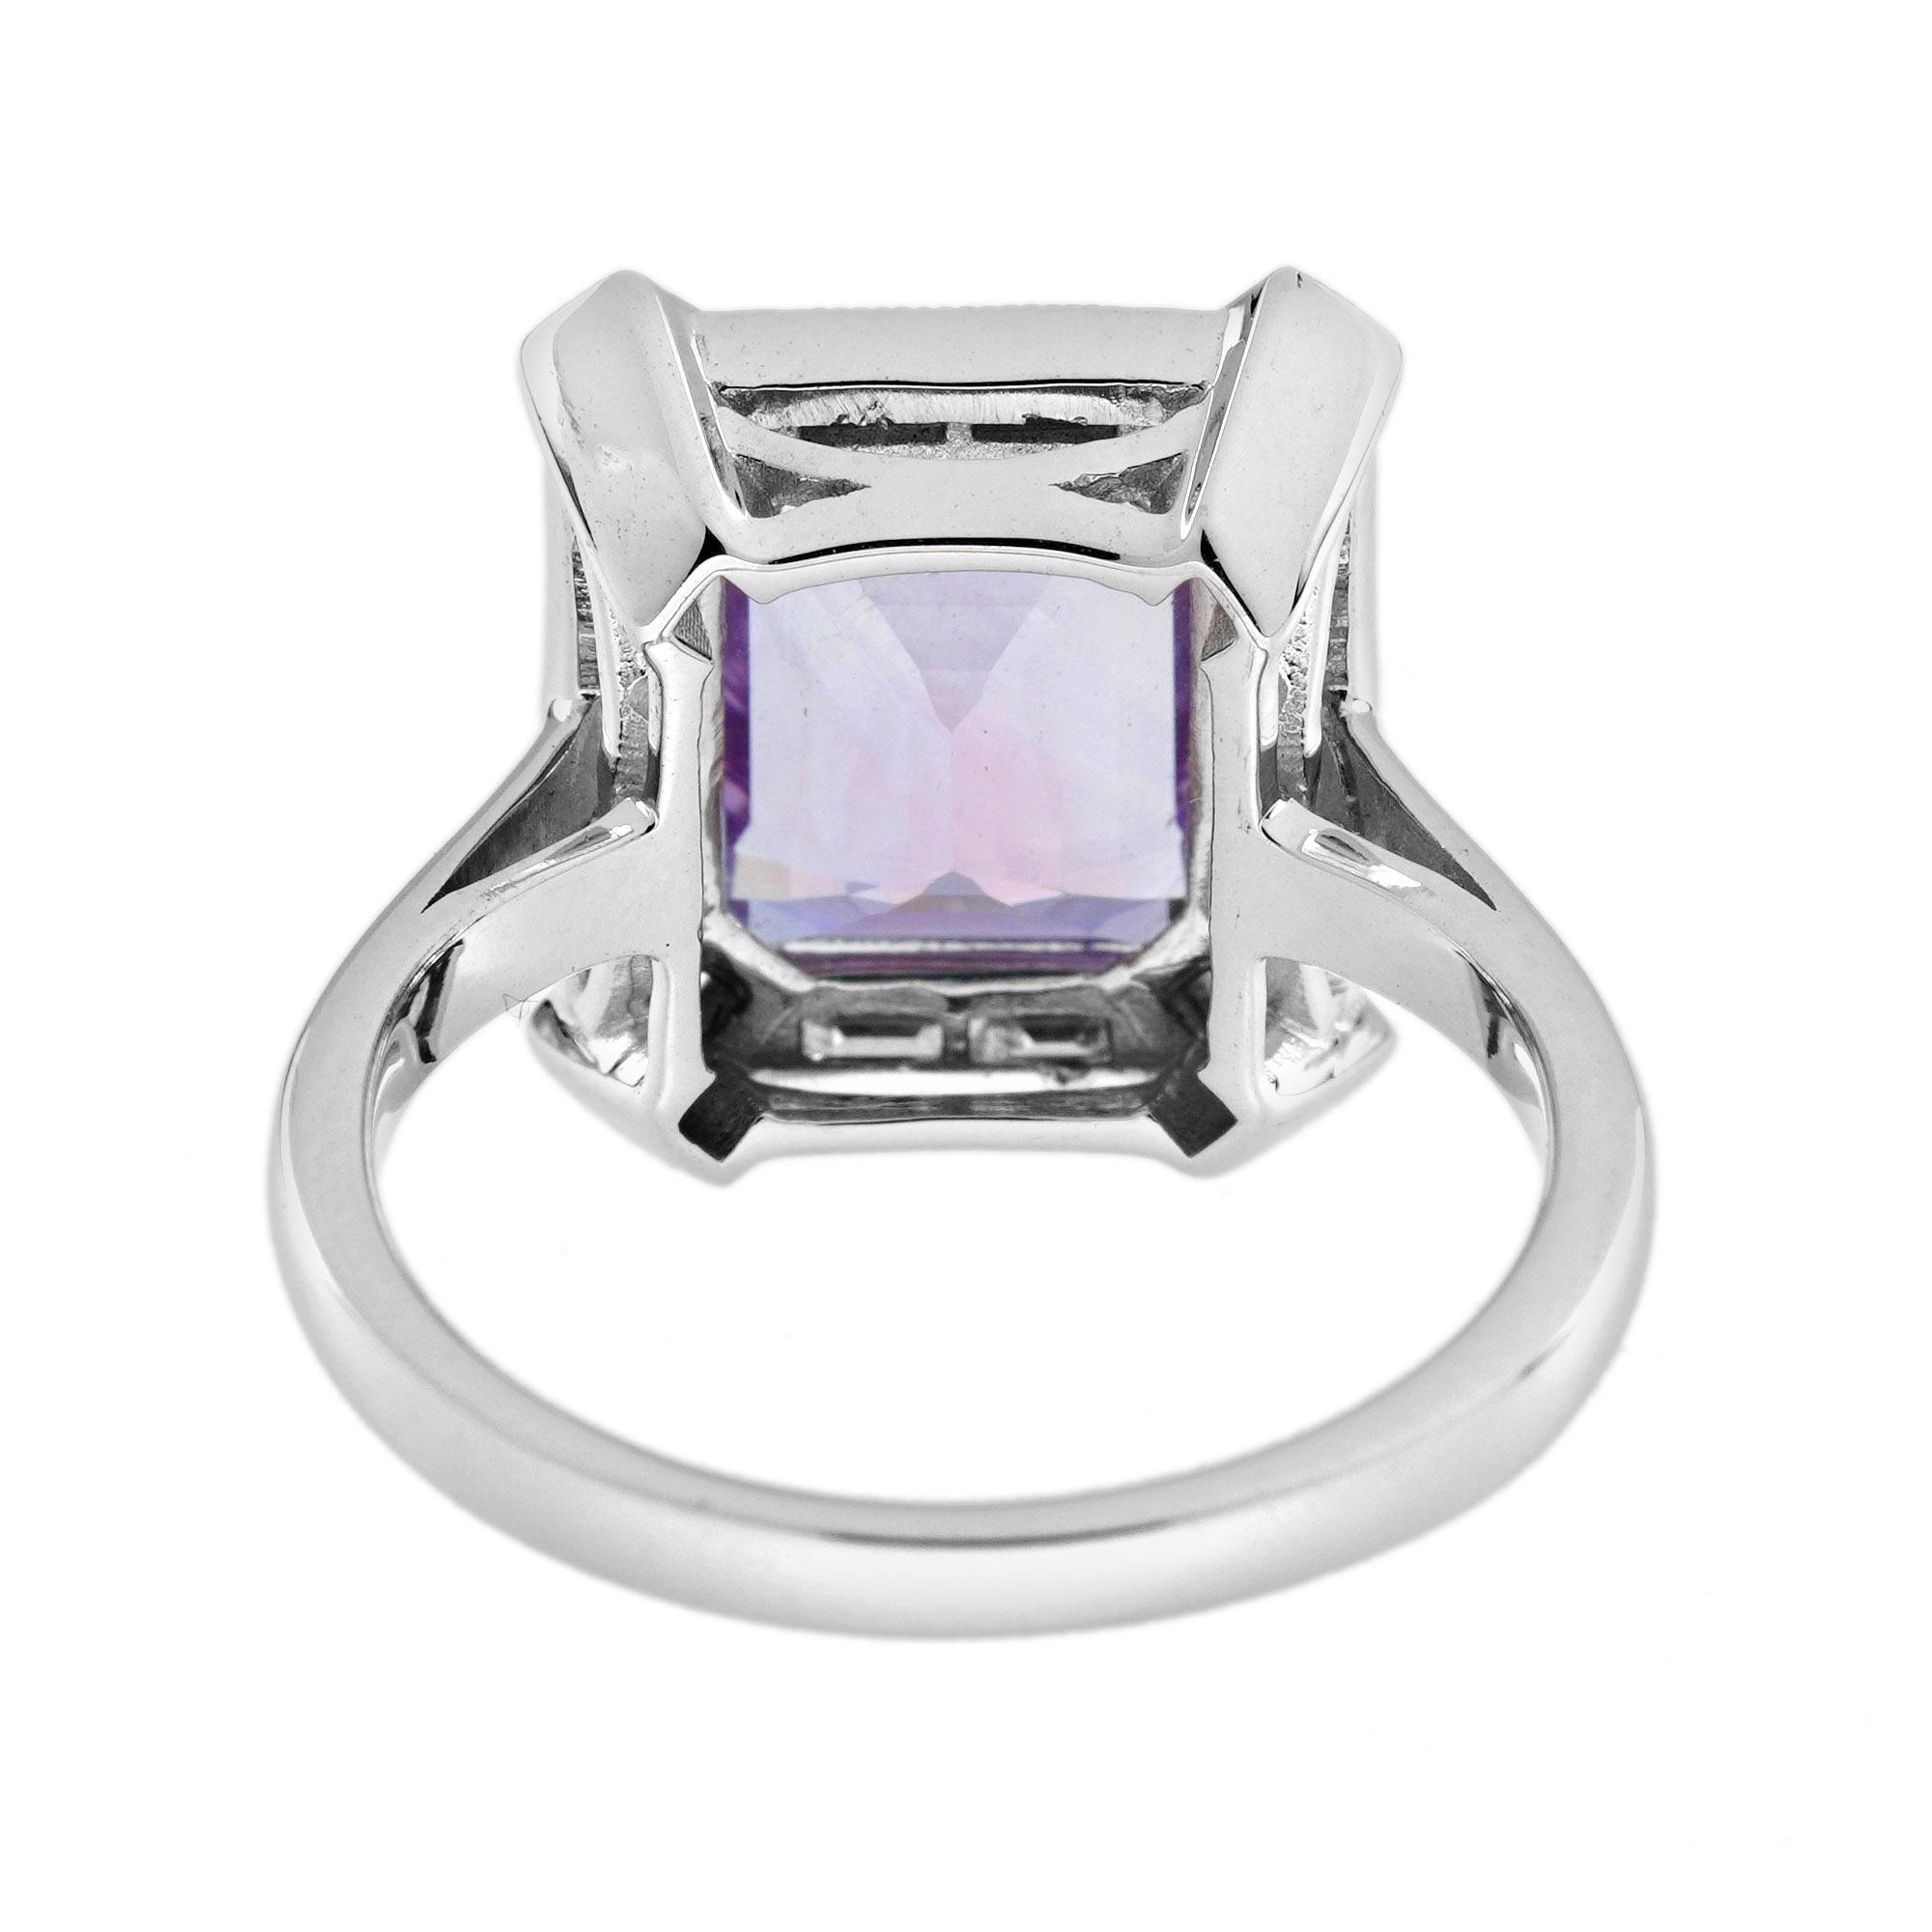 Emerald Cut Pink Amethyst and Diamond Halo Art Deco Style Ring in 14K White Gold For Sale 1